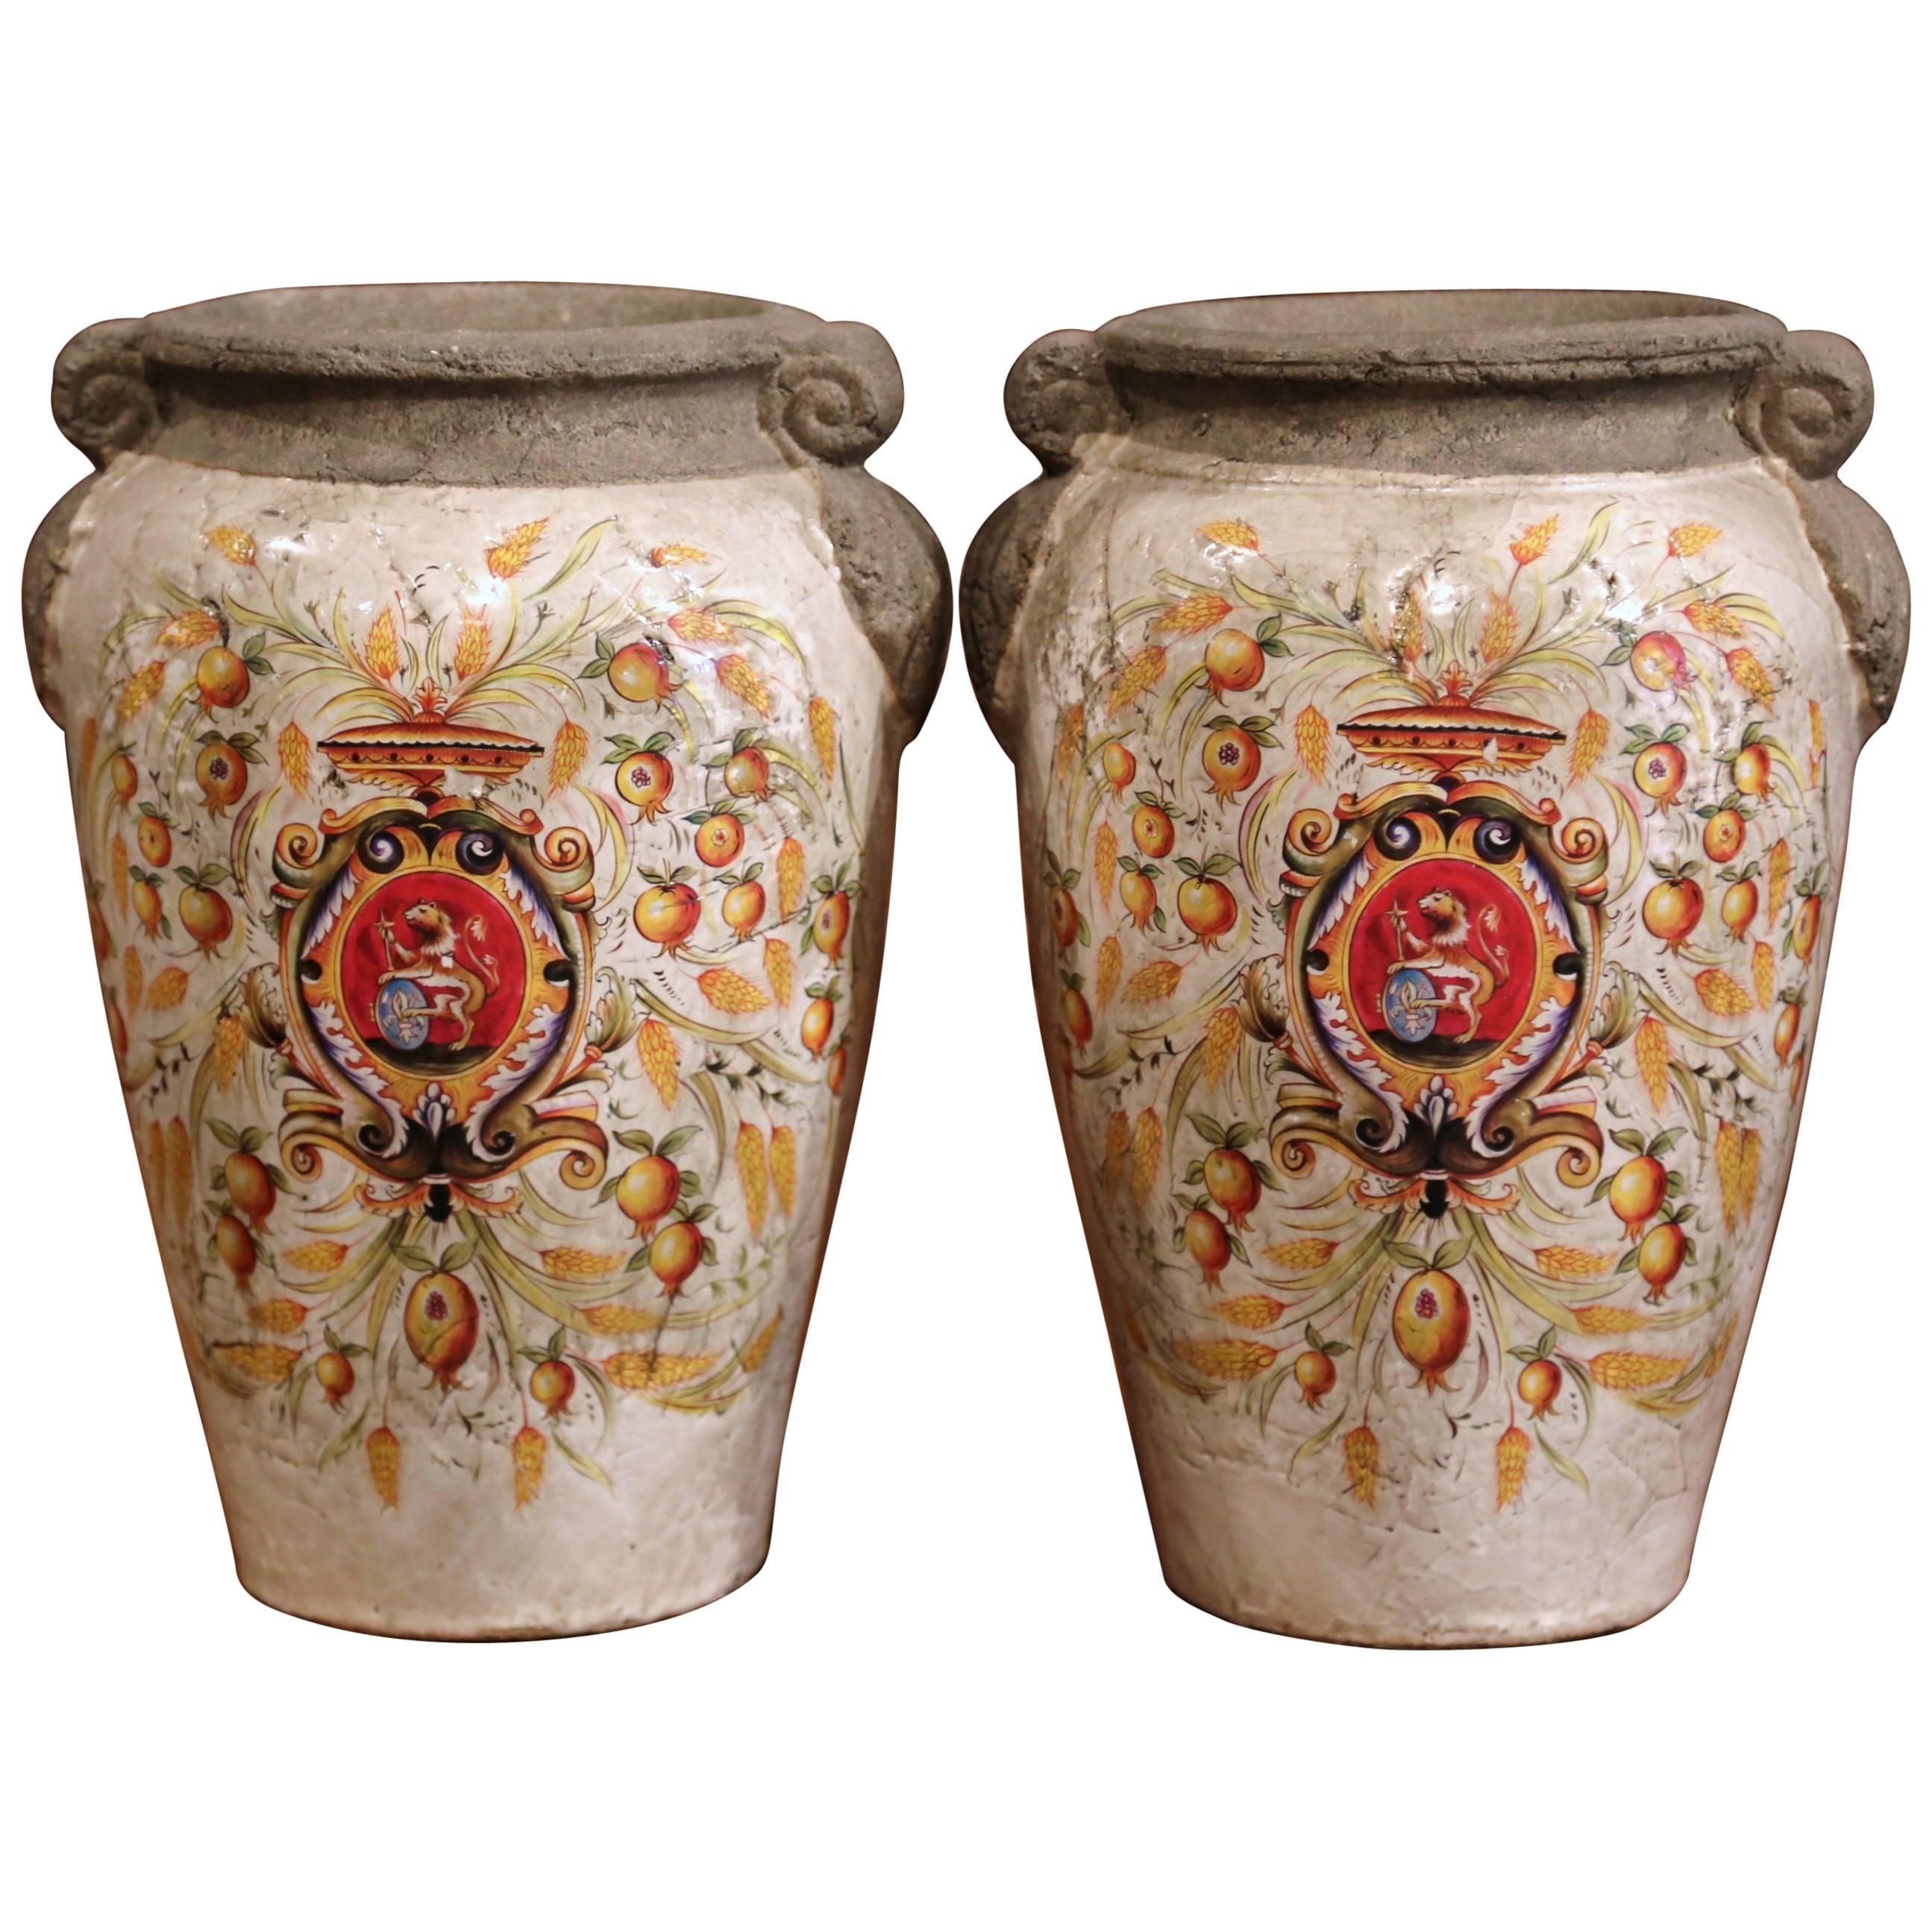 Pair of Italian Decorative Hand-Painted Vases with Wheat and Fruit